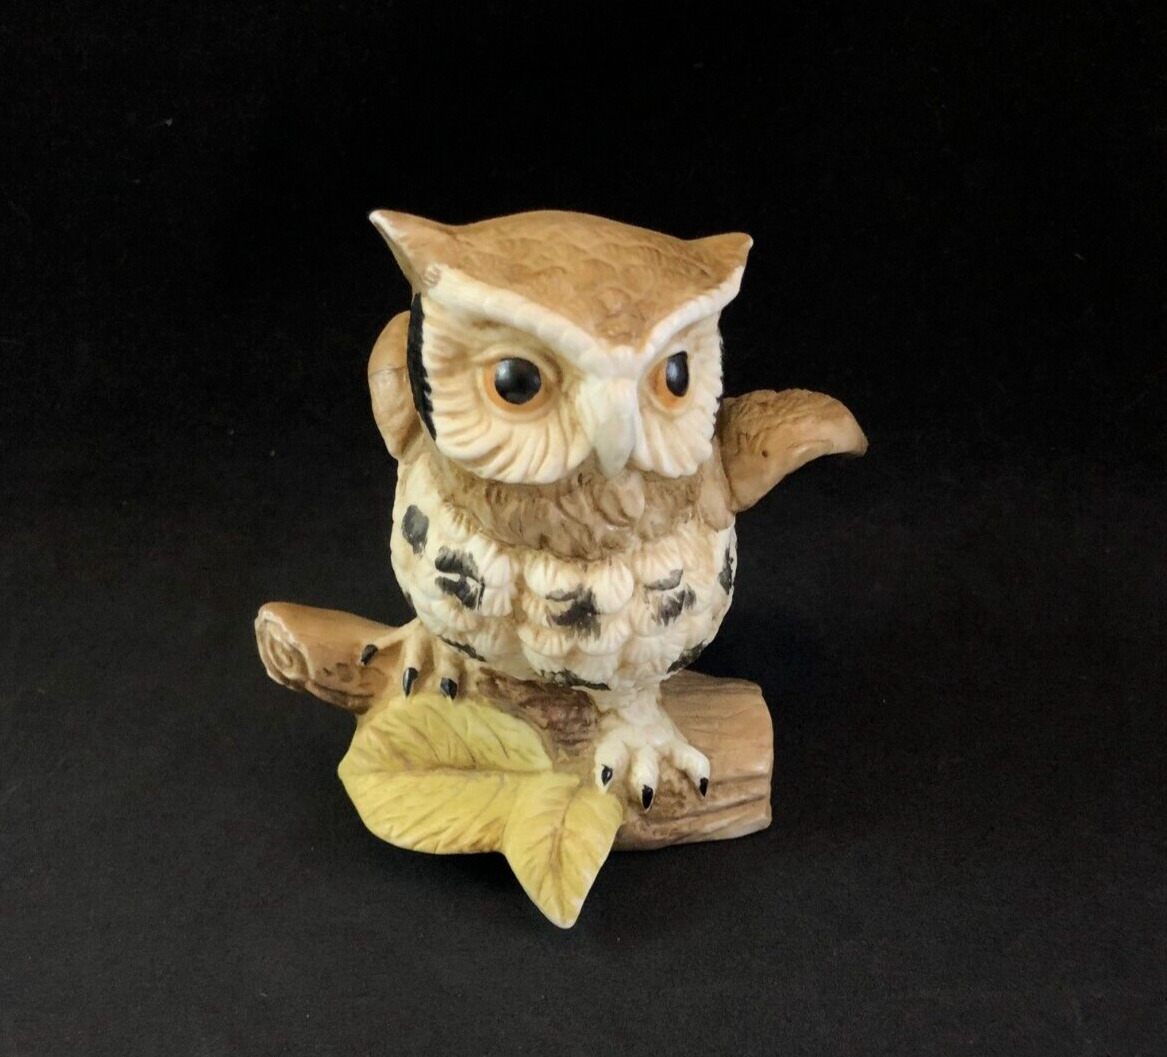 Vintage Ceramic Owl Figurine Owl Perched on Branch with Leaves